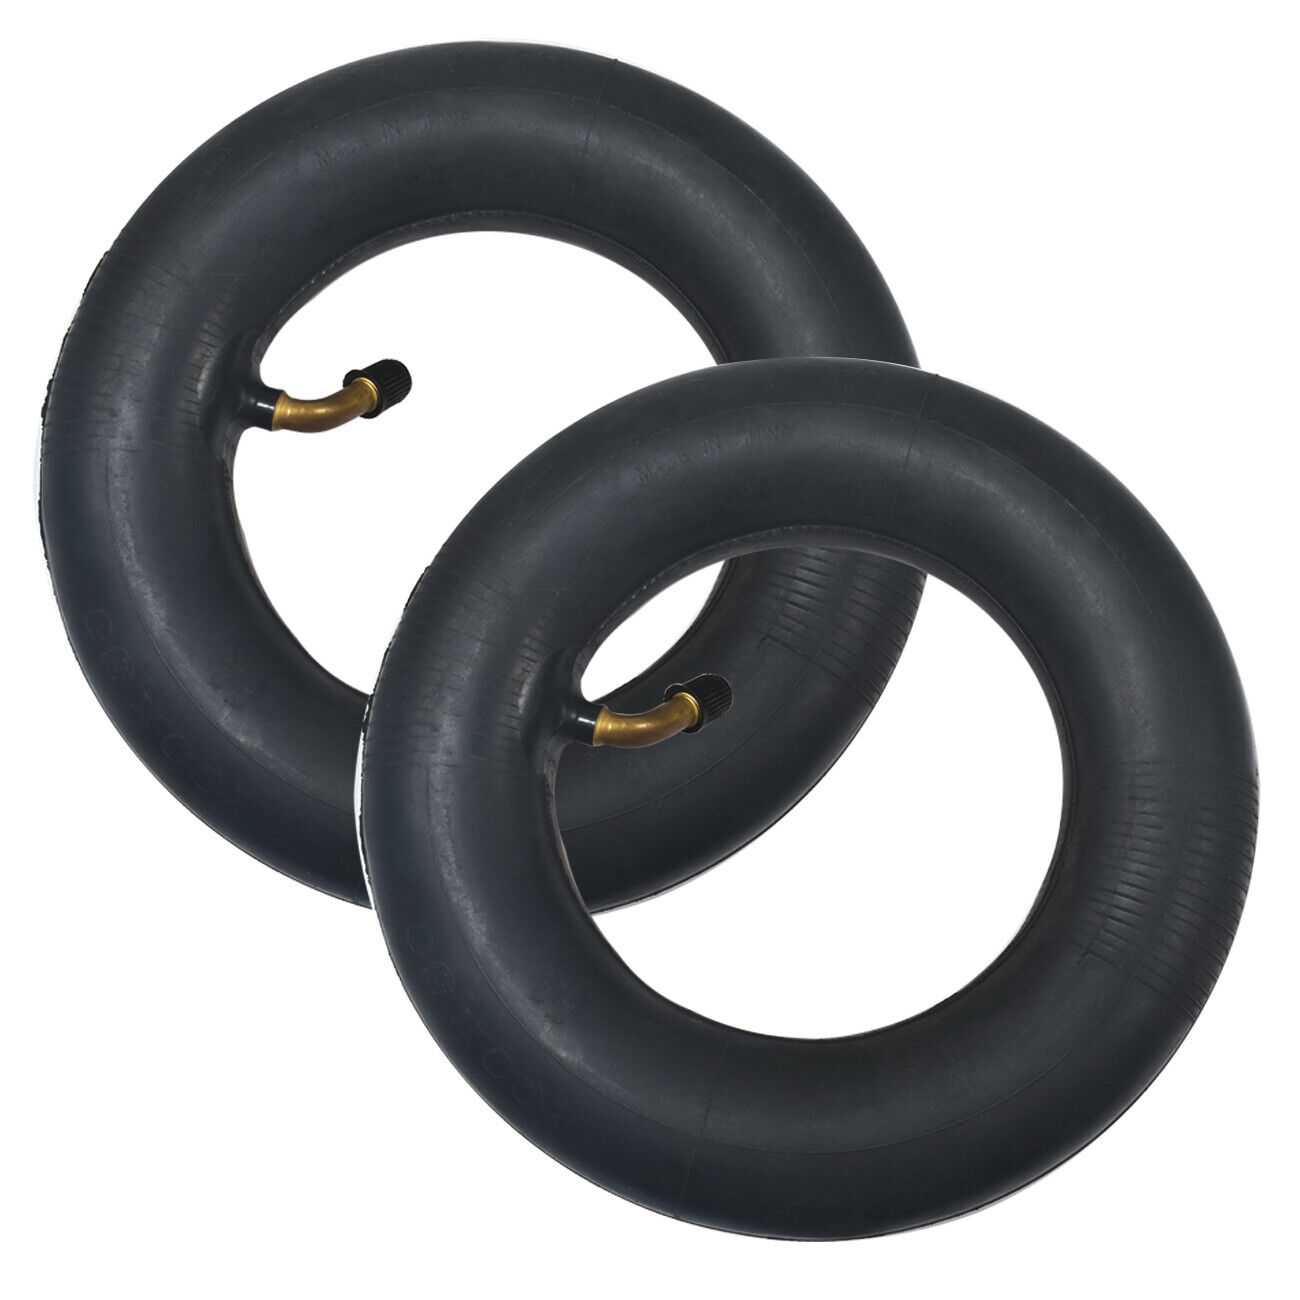 2x 200x50 IIR Inner Tube For Razor E100 E125 E150 E175 E200 Scooter 8"X2" Tire Unbranded Does not apply